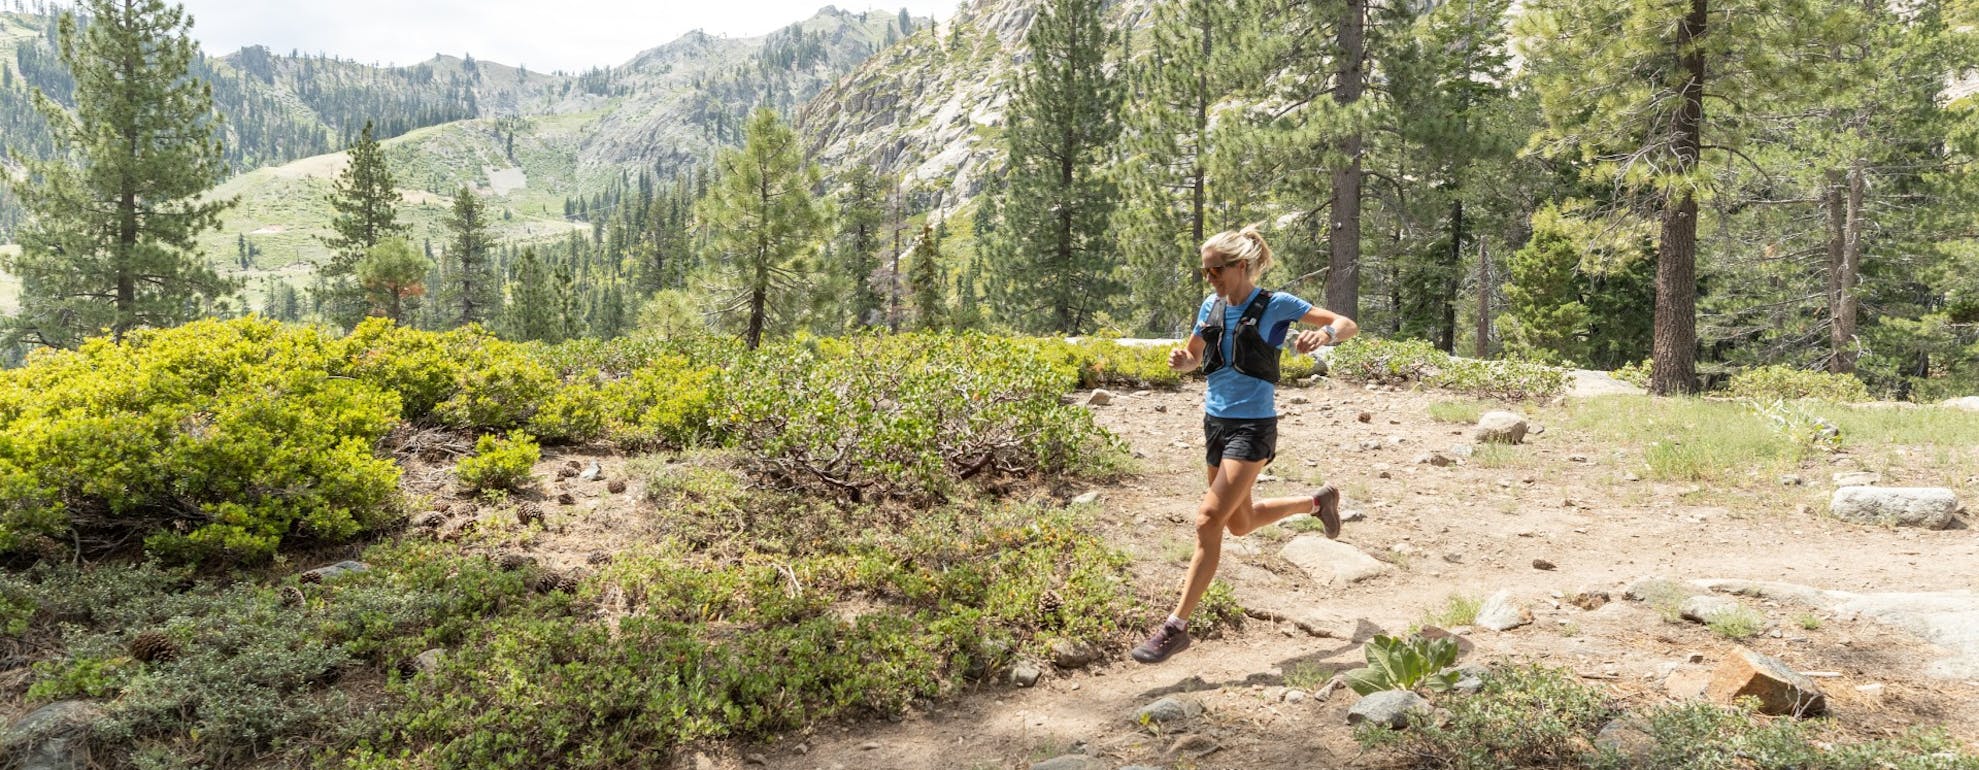 q-and-a-with-salomon-trail-athlete-beth-pascall